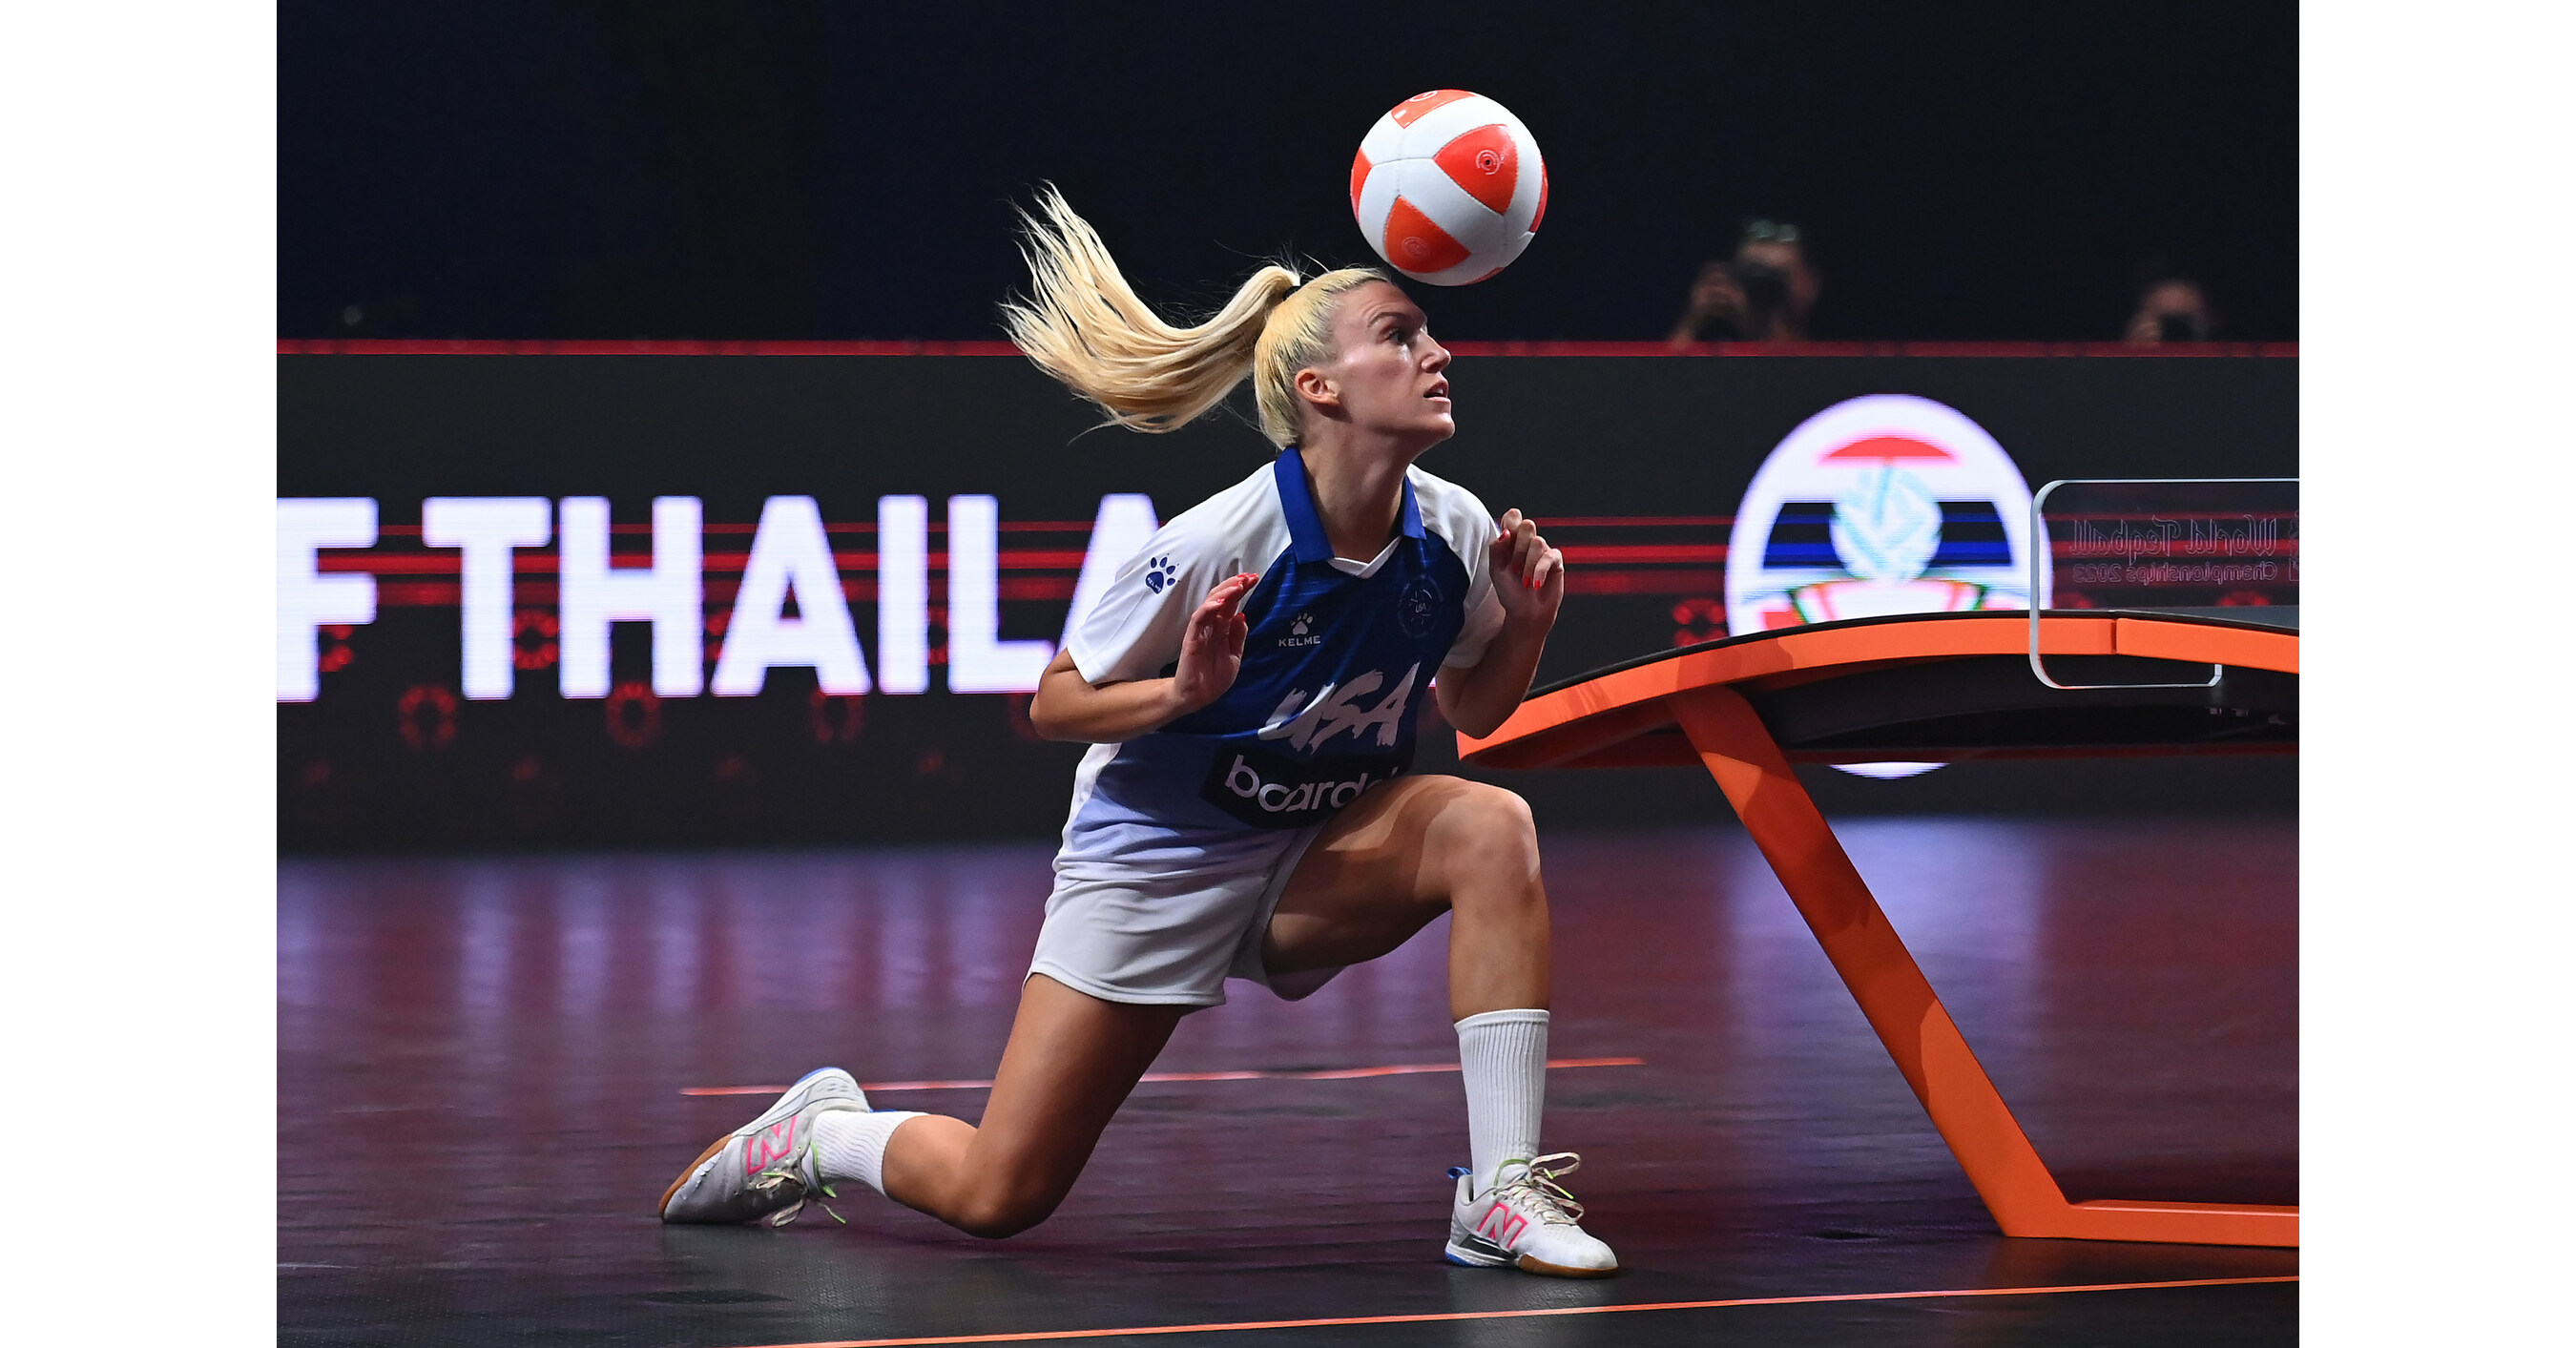 USA Players Compete in Semi-Finals in Two Categories at World Teqball Championships 2023 webfi